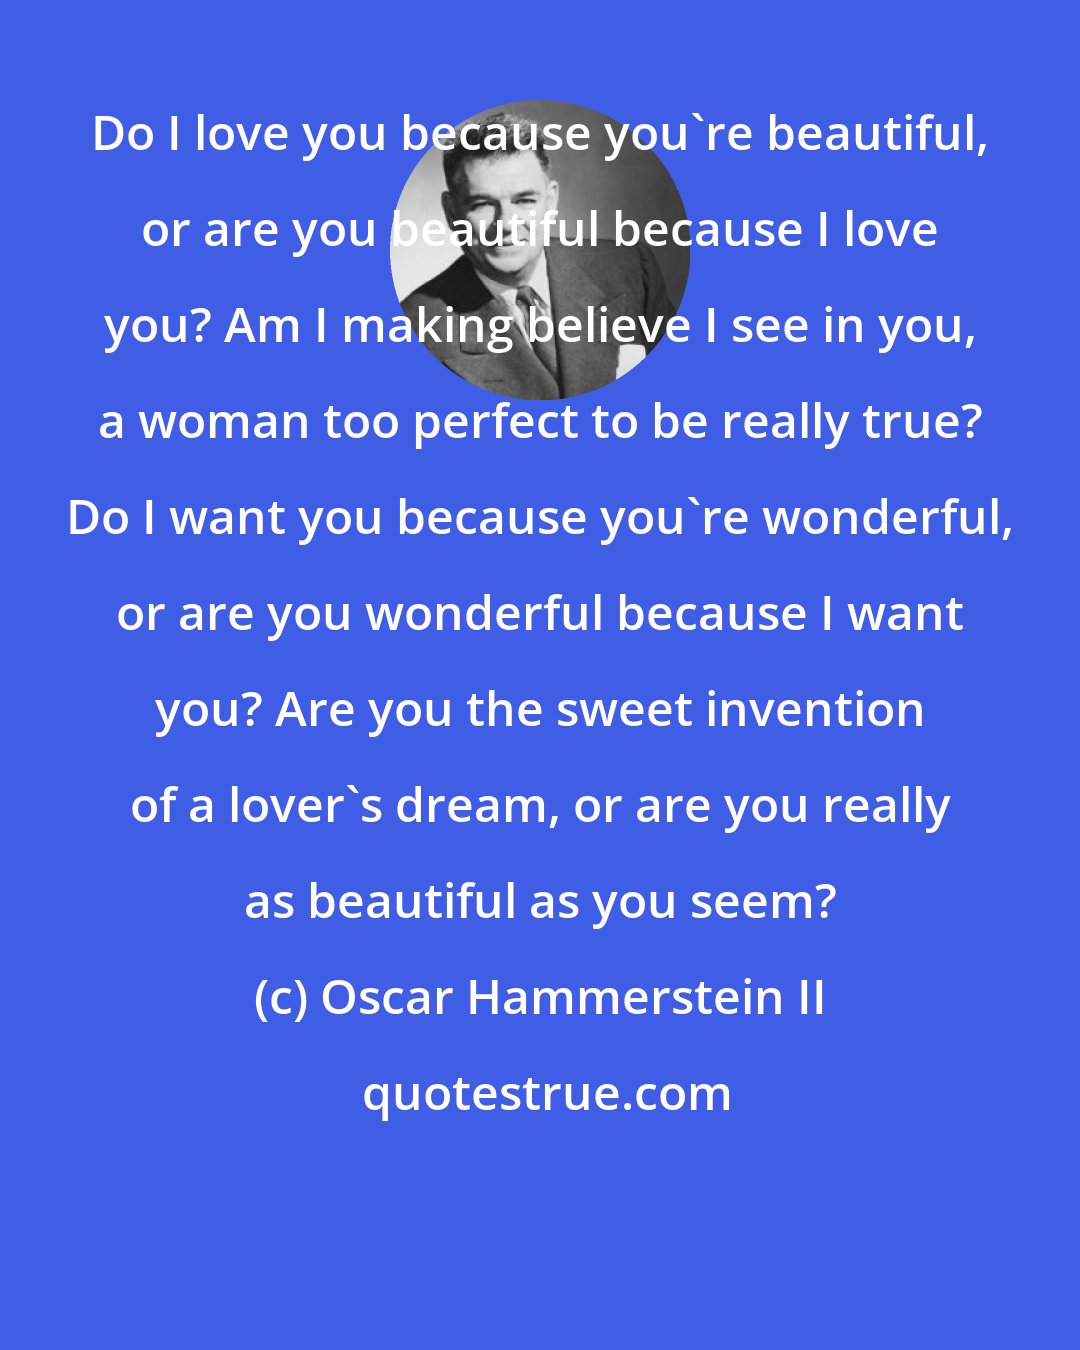 Oscar Hammerstein II: Do I love you because you're beautiful, or are you beautiful because I love you? Am I making believe I see in you, a woman too perfect to be really true? Do I want you because you're wonderful, or are you wonderful because I want you? Are you the sweet invention of a lover's dream, or are you really as beautiful as you seem?